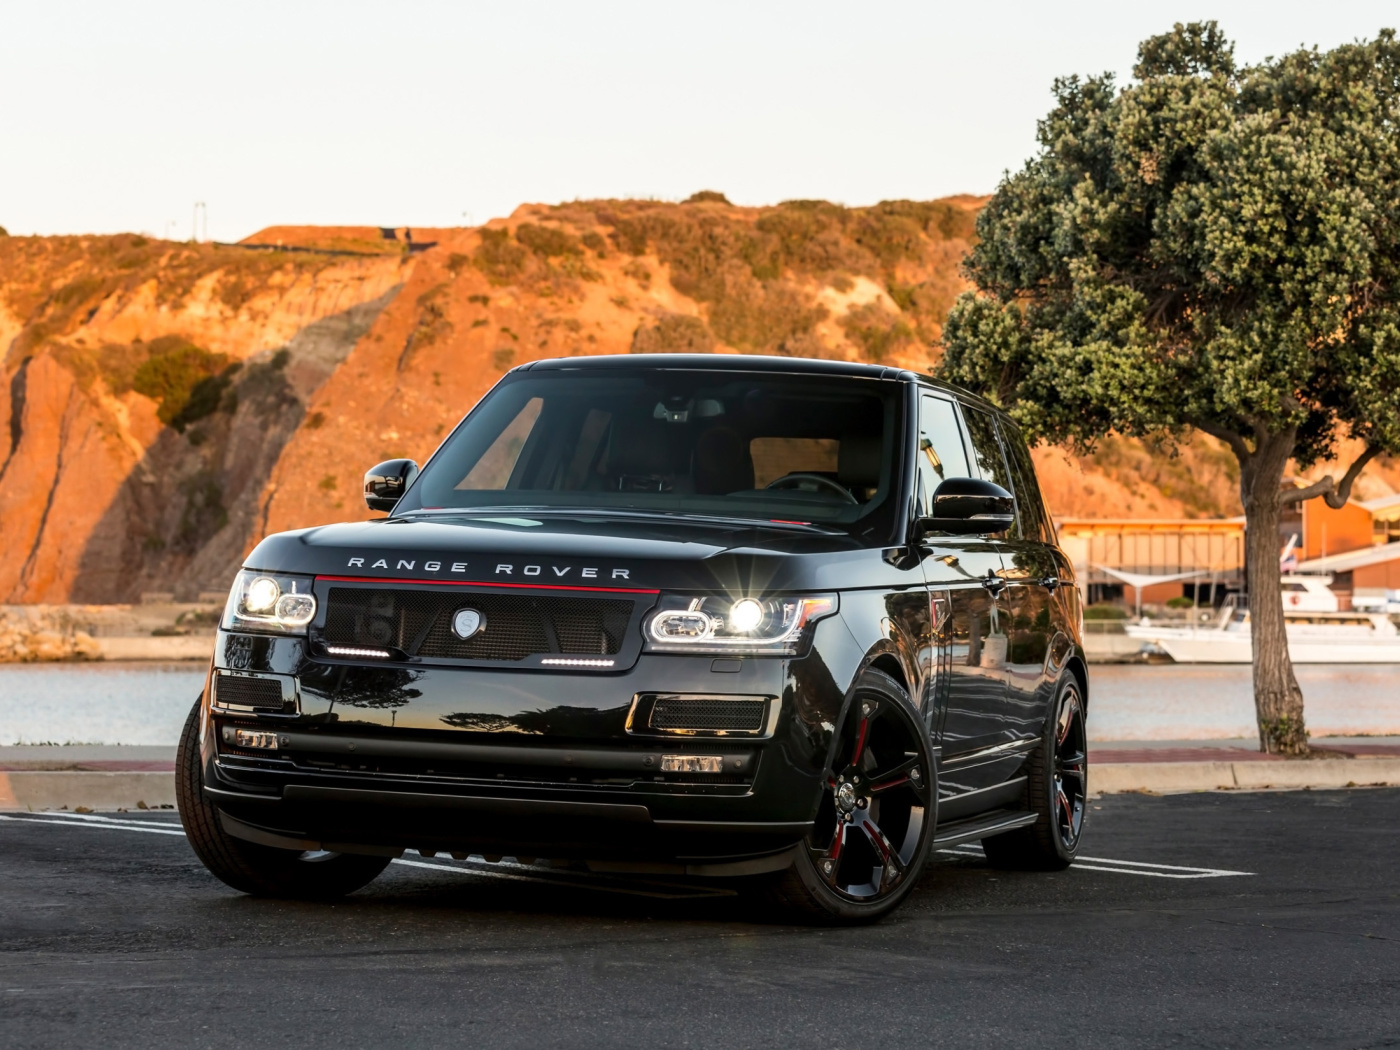 Range Rover STRUT with Grille Package wallpaper 1400x1050